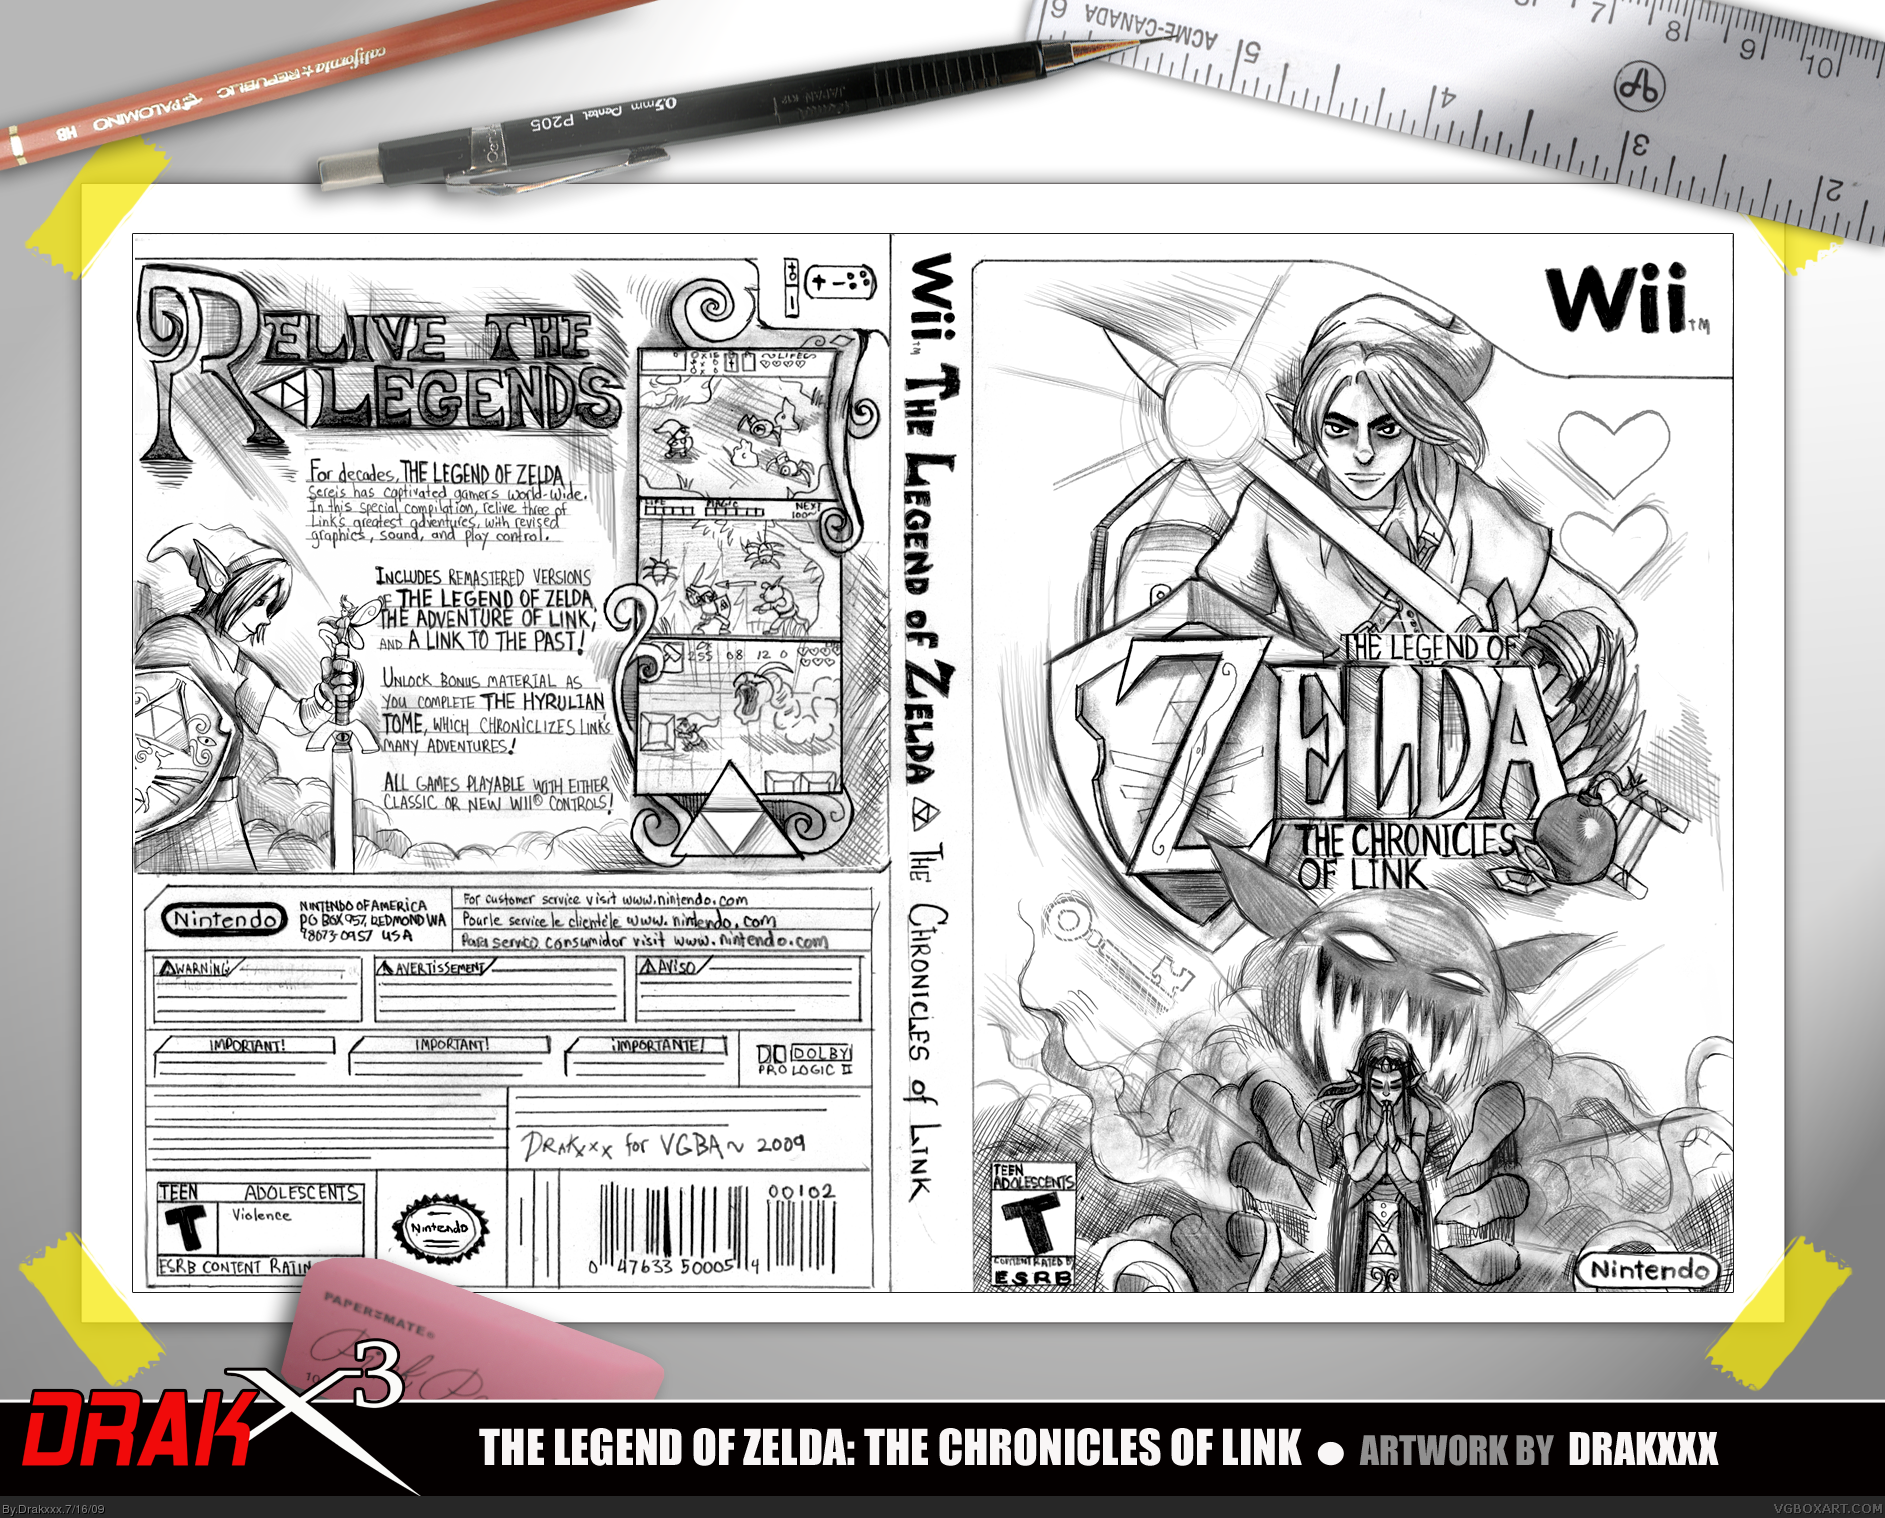 The Legend of Zelda: The Chronicles of Link box cover